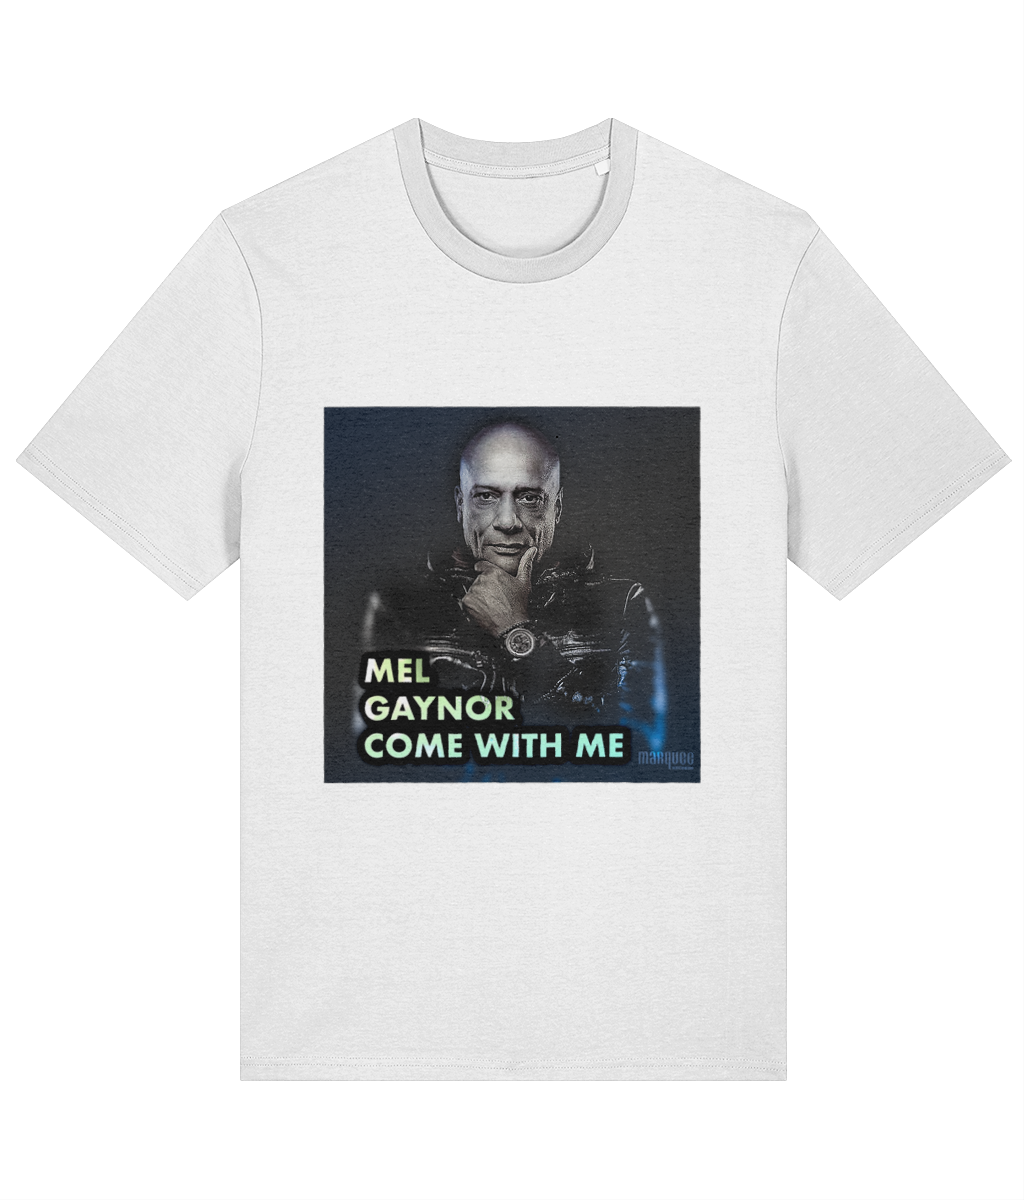 Mel Gaynor Come With Me T-Shirt